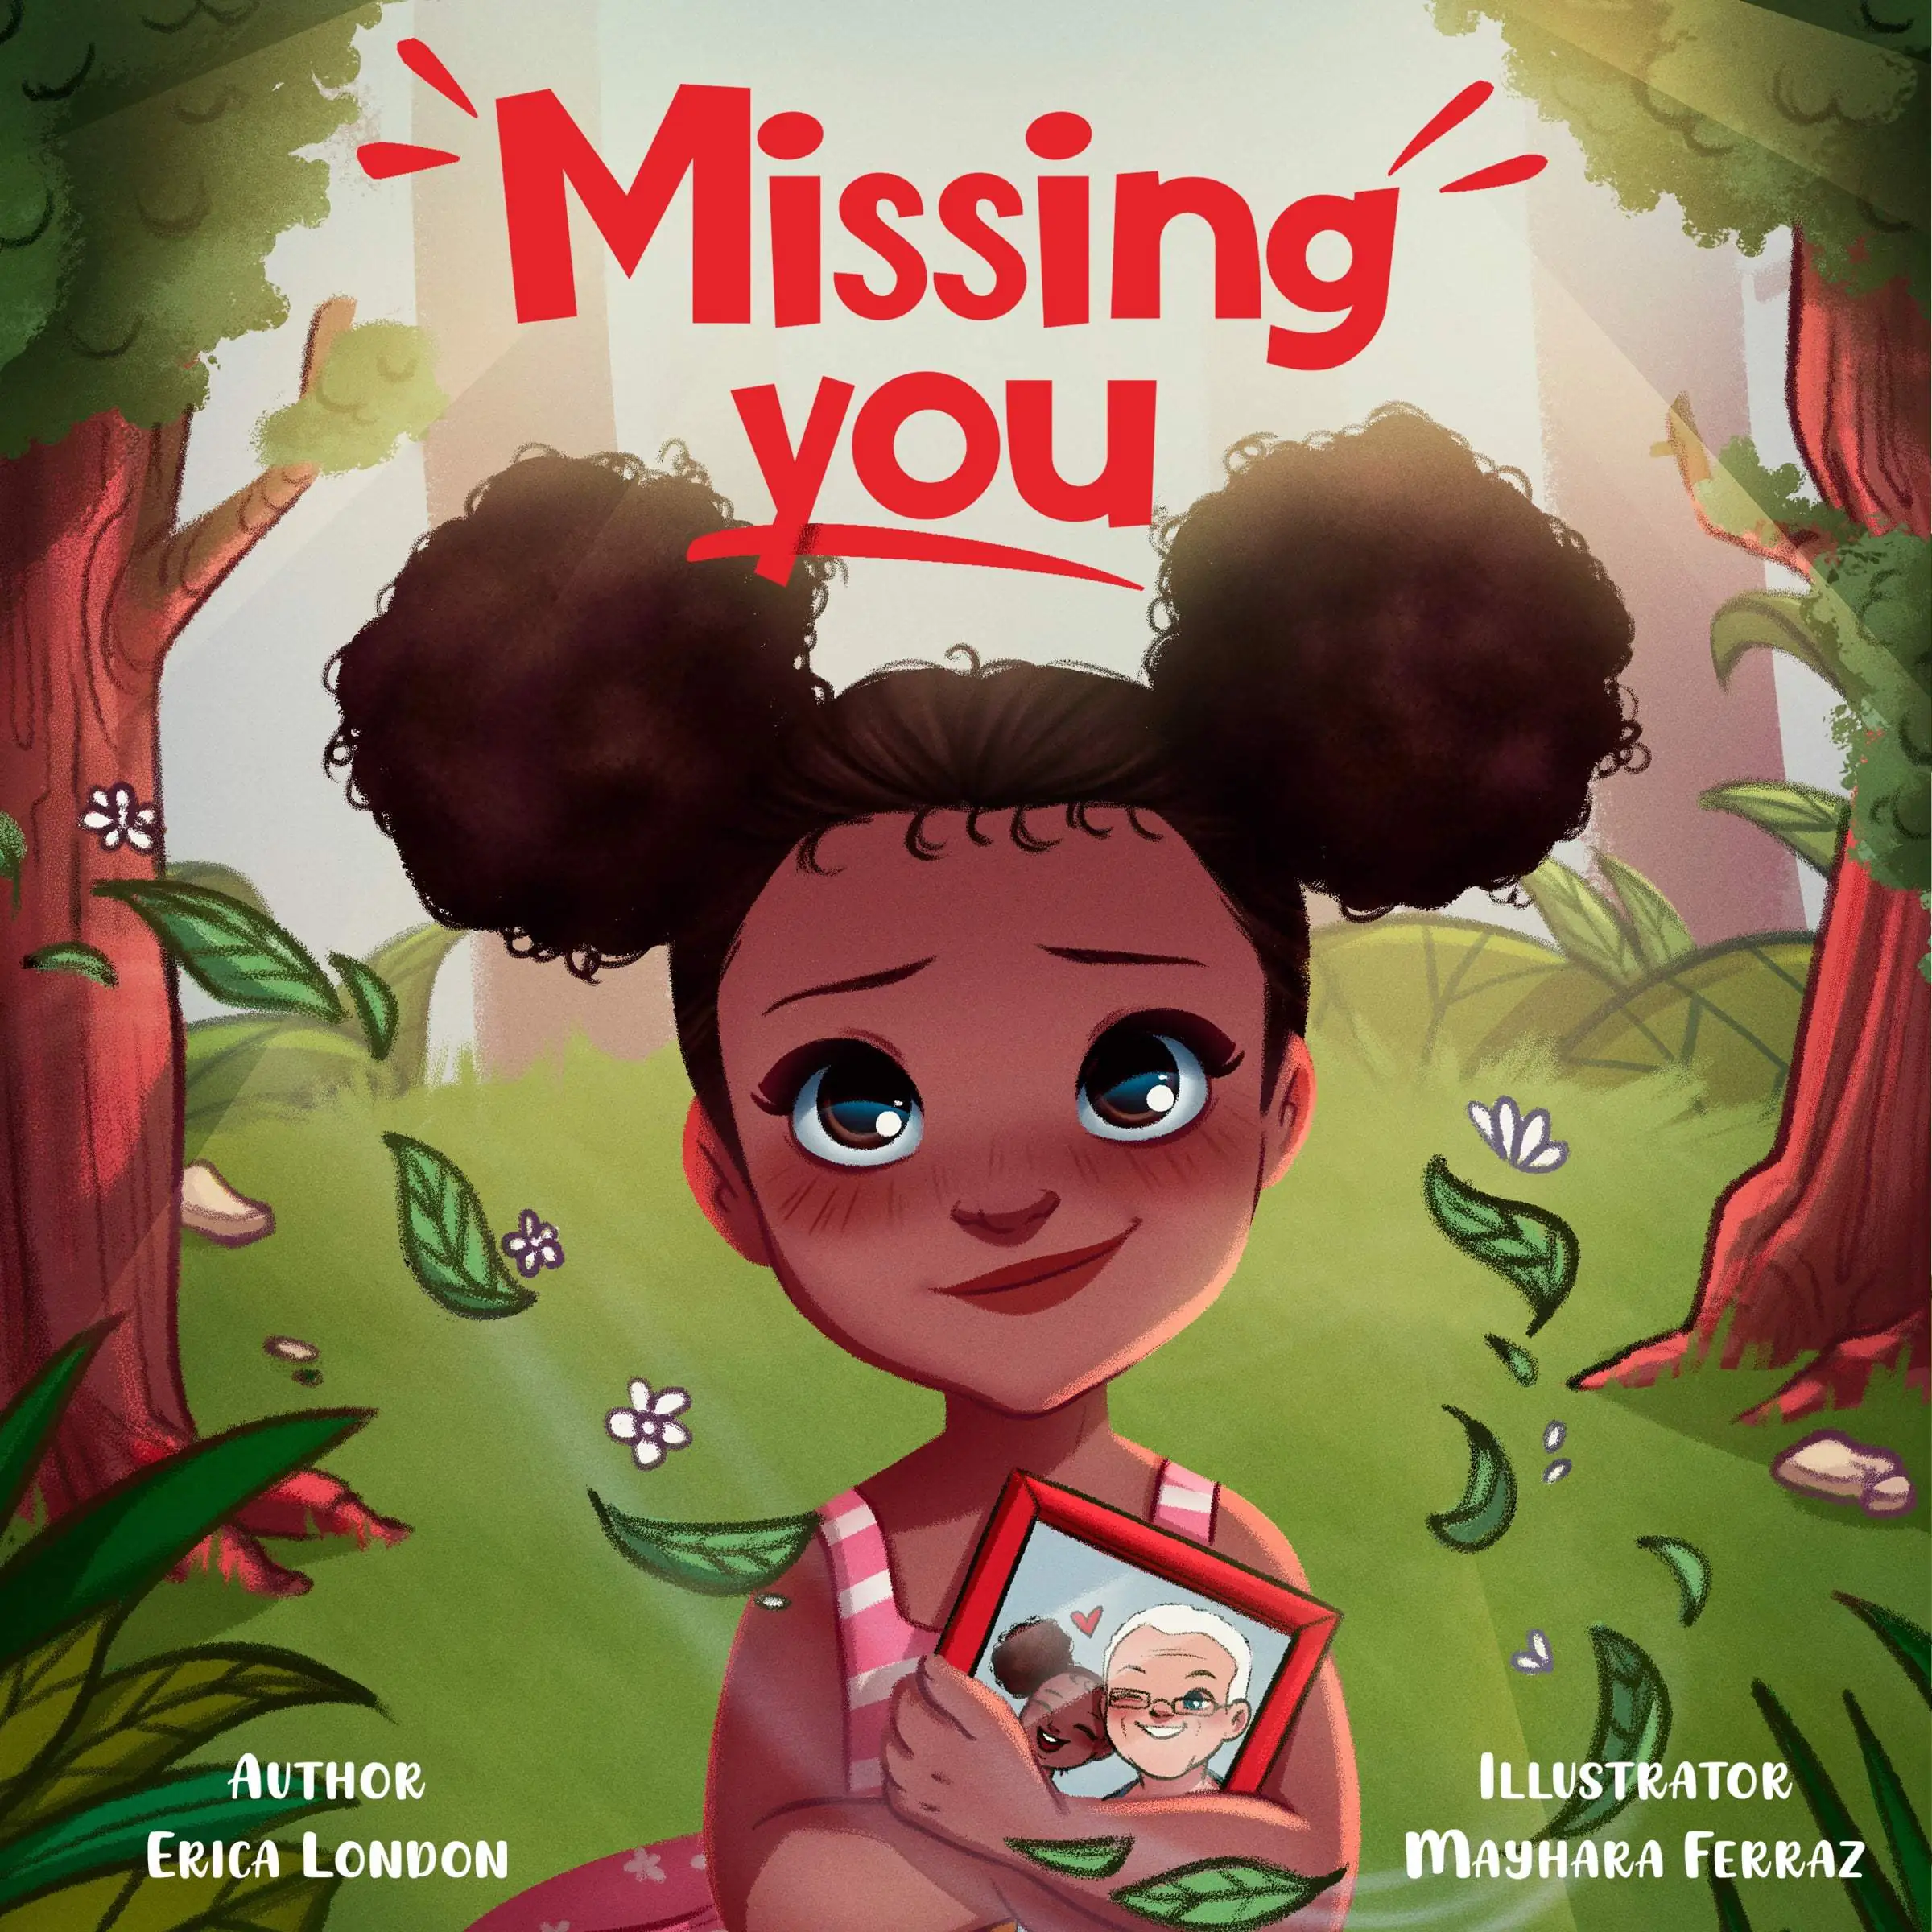 Missing You Audiobook by Erica London